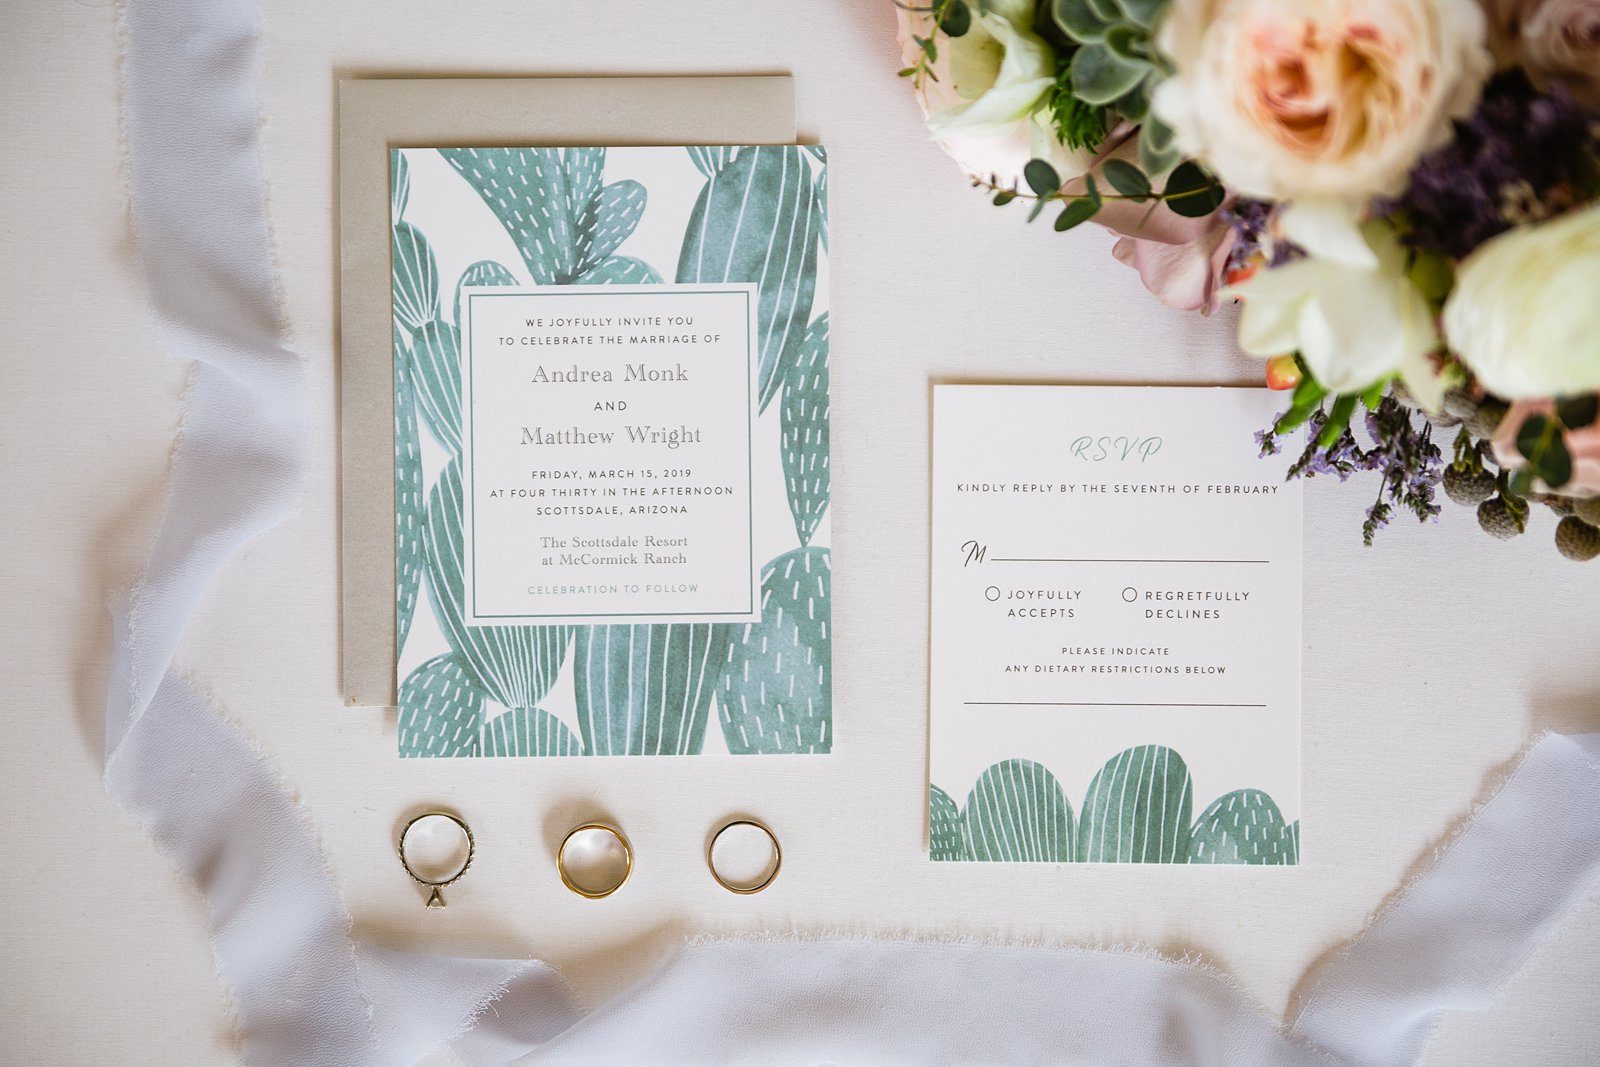 Cactus wedding invitation stationary from Minted by PMA Photography.